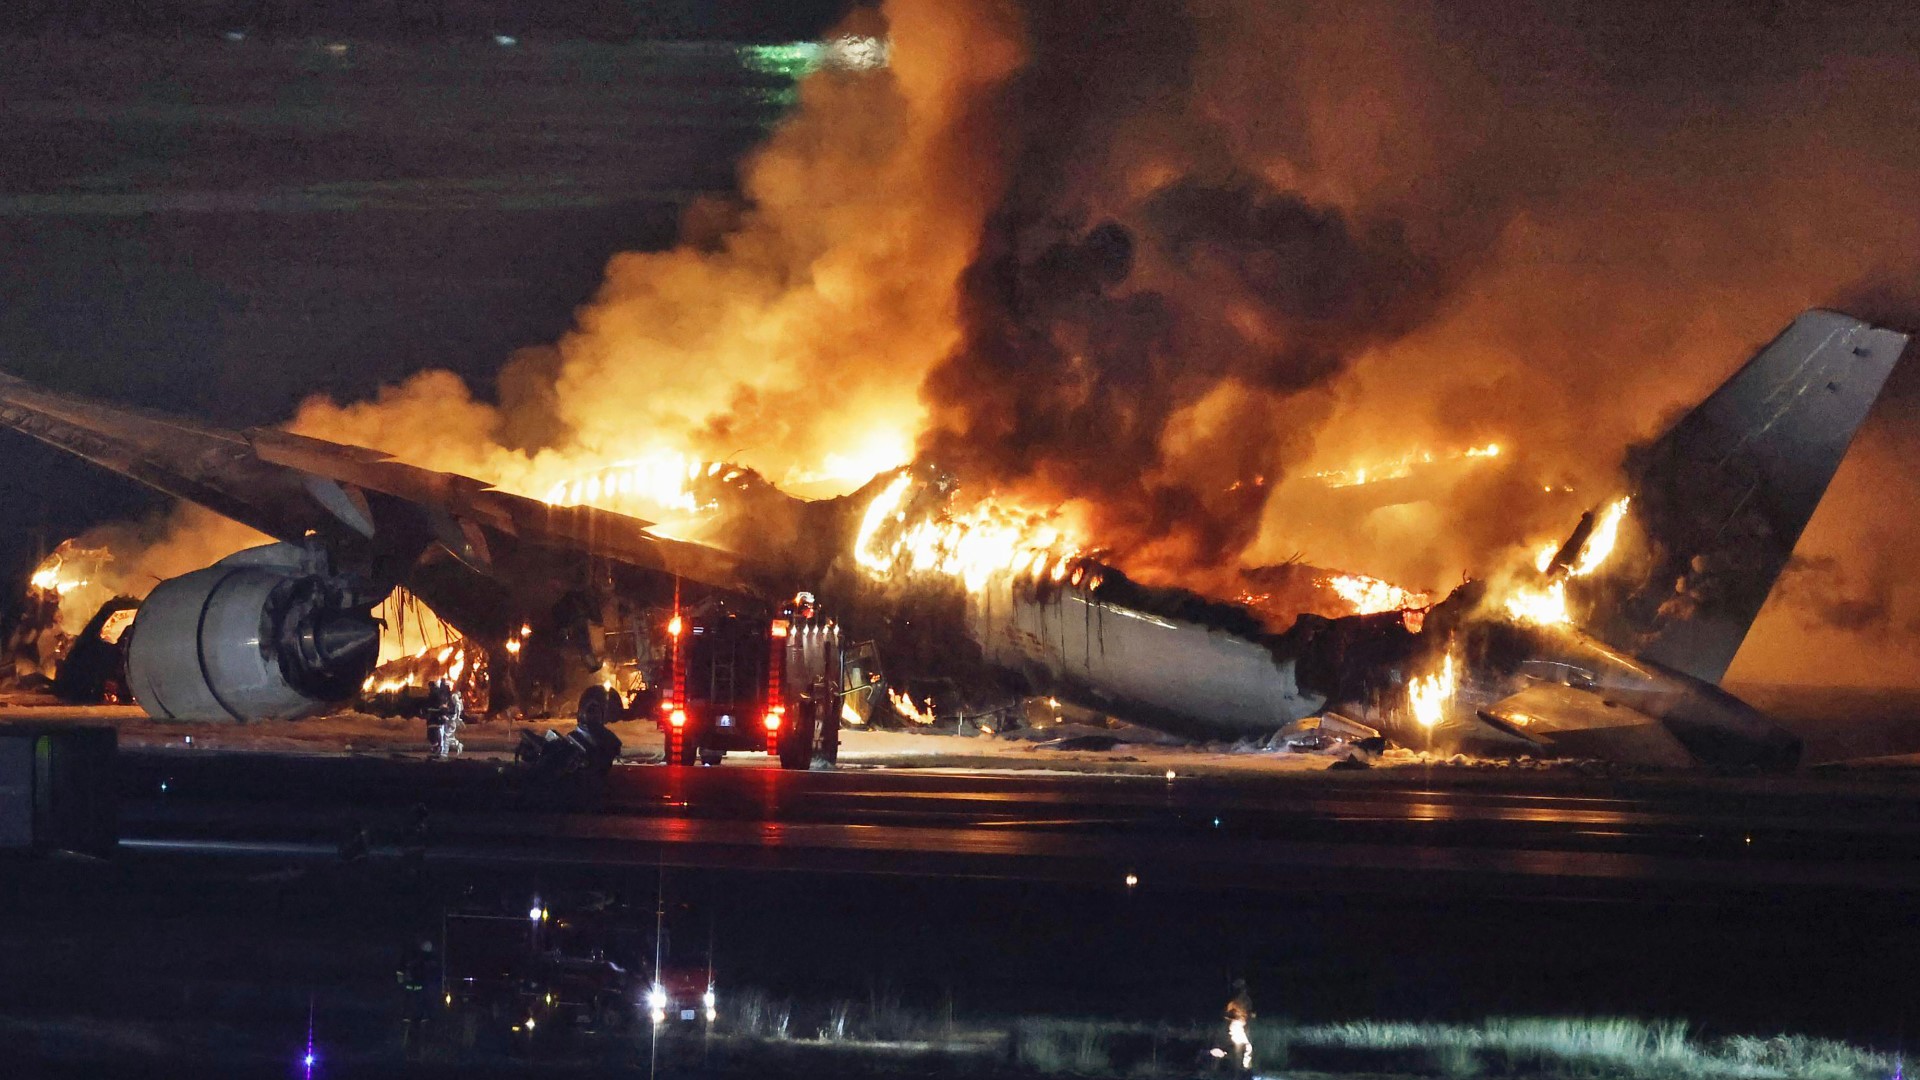 A plane burst into flames on the runway of Tokyo’s Haneda airport on Tuesday, with news reports saying it hit another aircraft after landing.